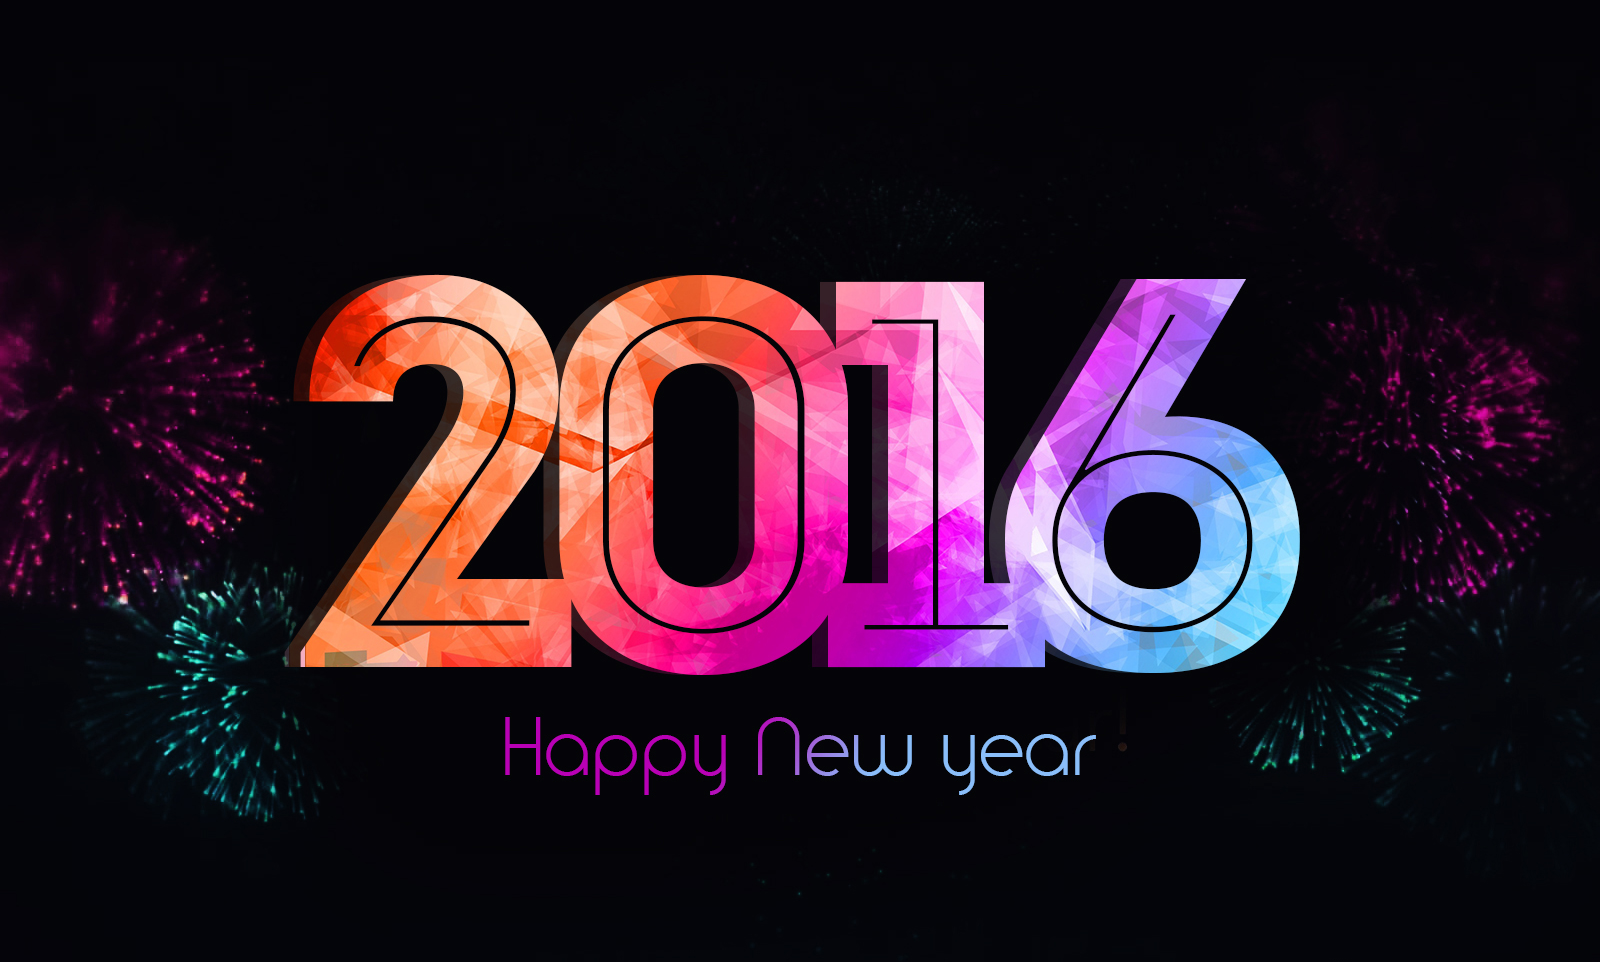 New Year 2016 HD Wallpapers for PC Desktops   Happy New Year 2016